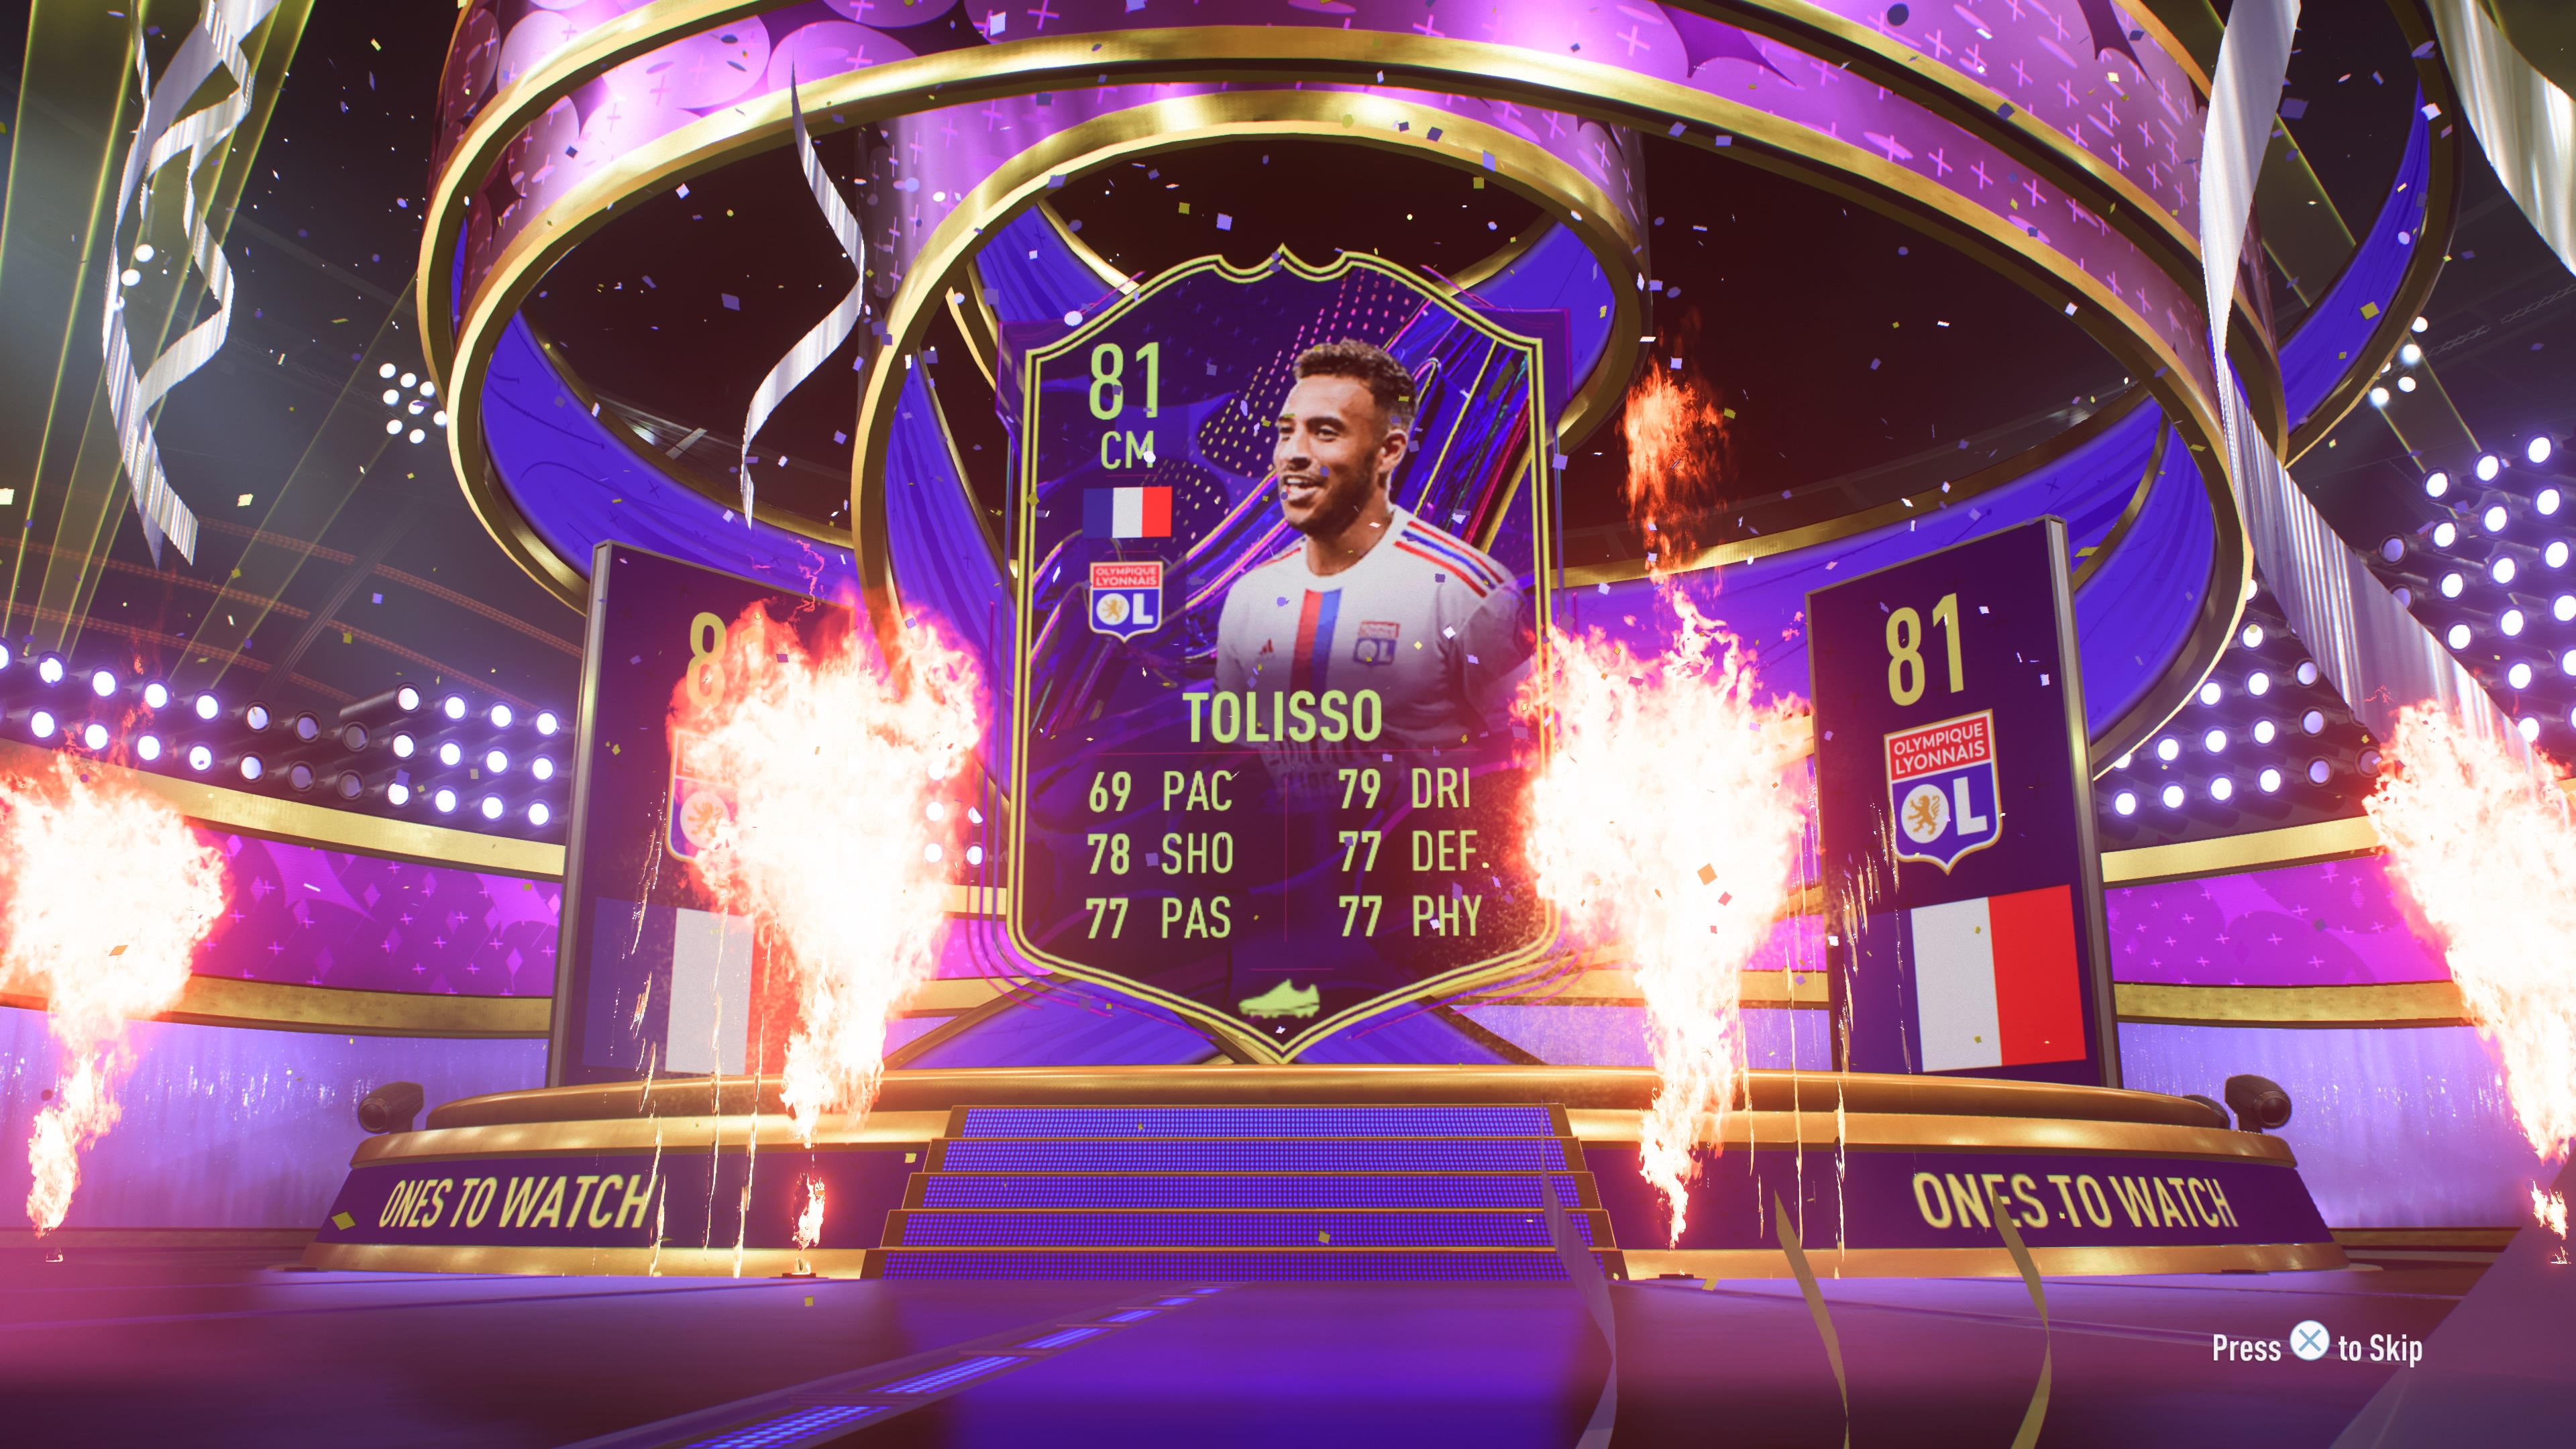 FIFA 23 World Cup Stars - All cards REVEALED & items explained